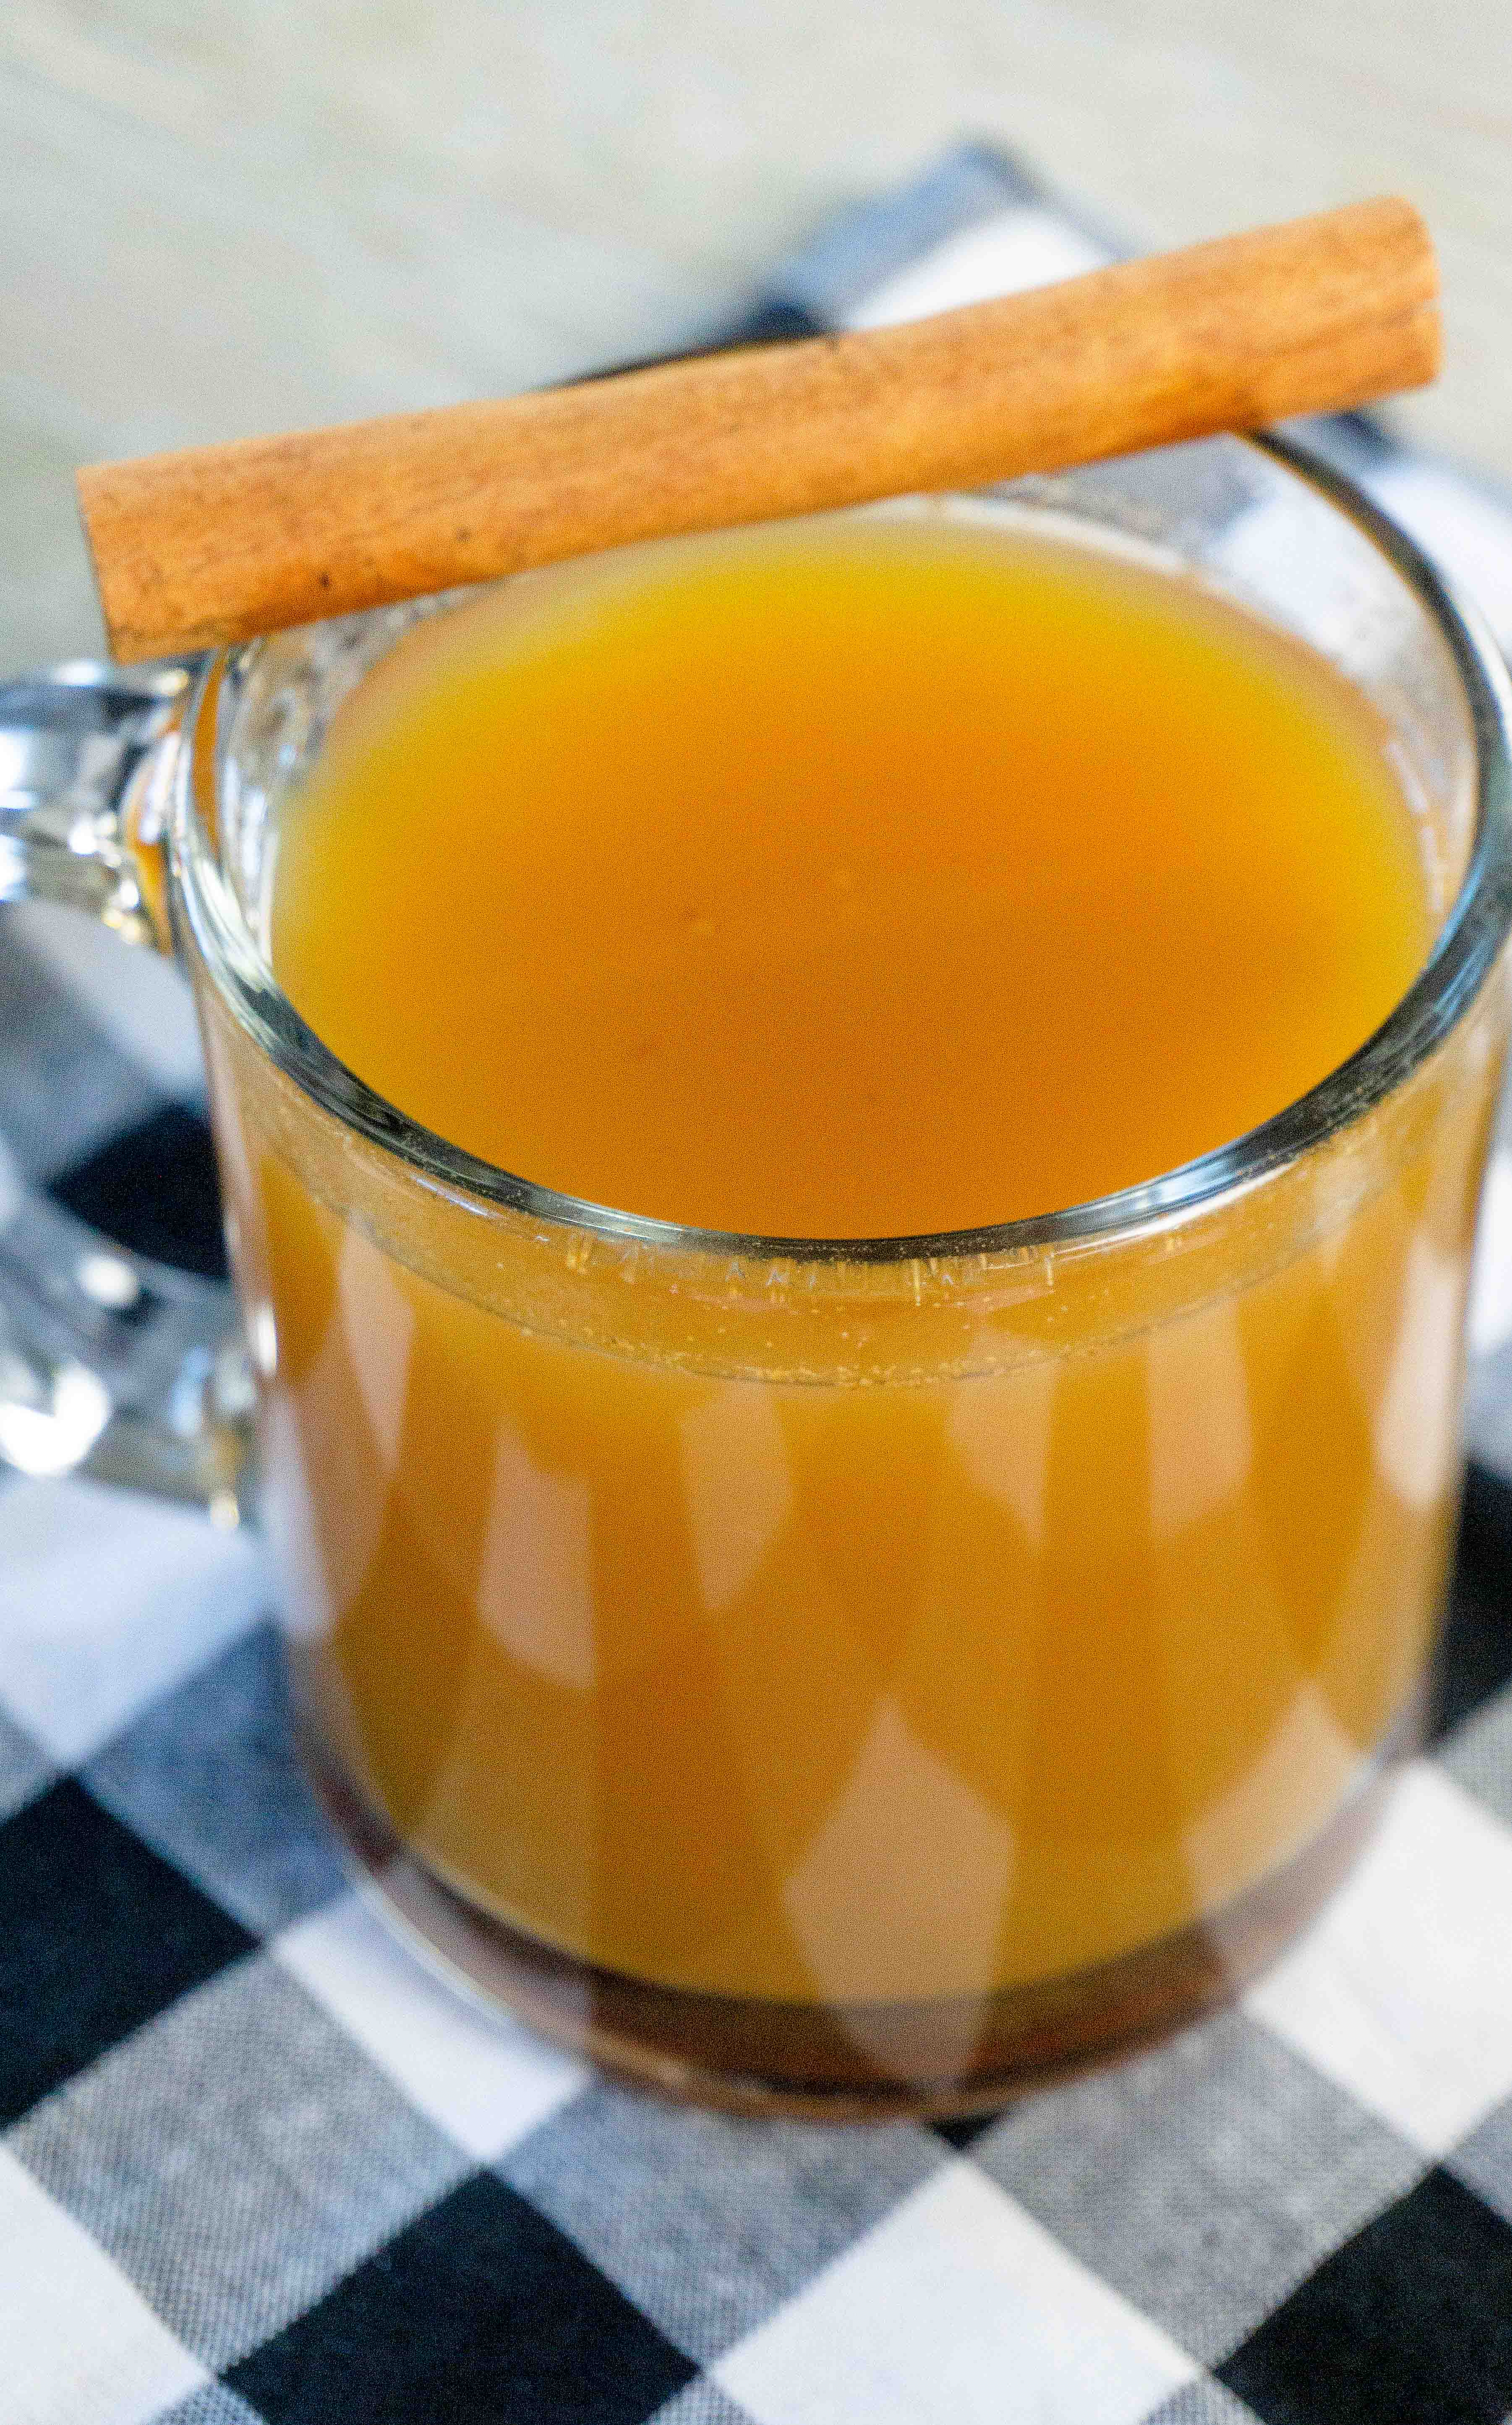 This amazing easy and delicious instant pot pumpkin apple cider is perfect for cold days! Heat this up during the winter months for a tasty treat! This easy 3 ingredient recipe is easy to make and can be done in just a few minutes! There is no pressure needed for this instant pot recipe! #instantpotdrinks #instantpot #pumpkindrinks